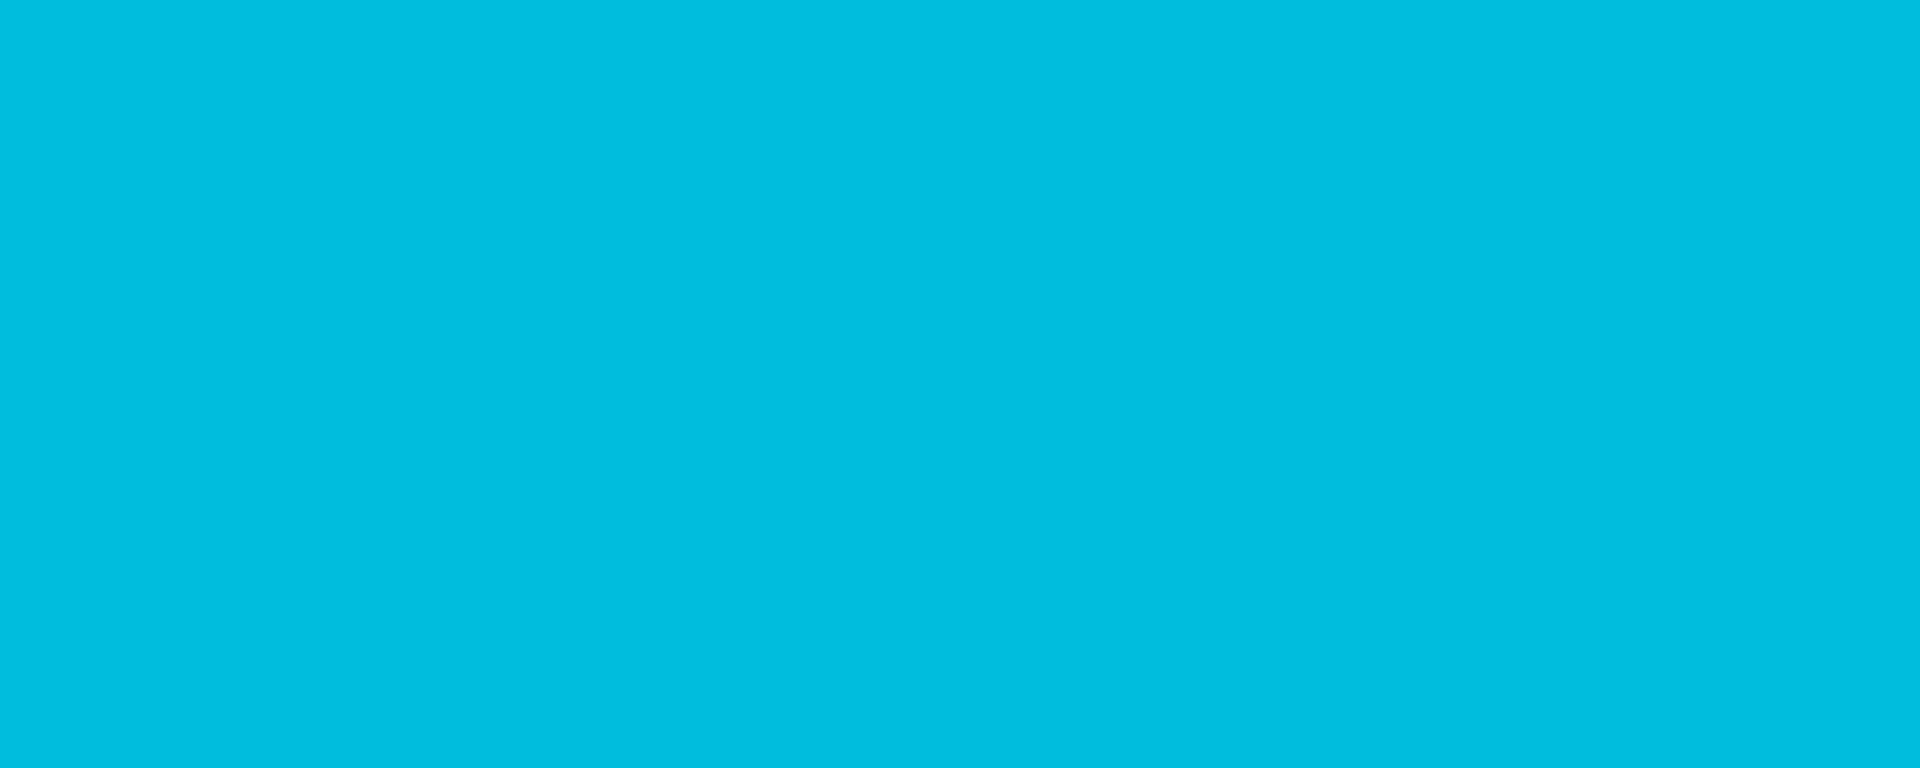 Blank image with teal background